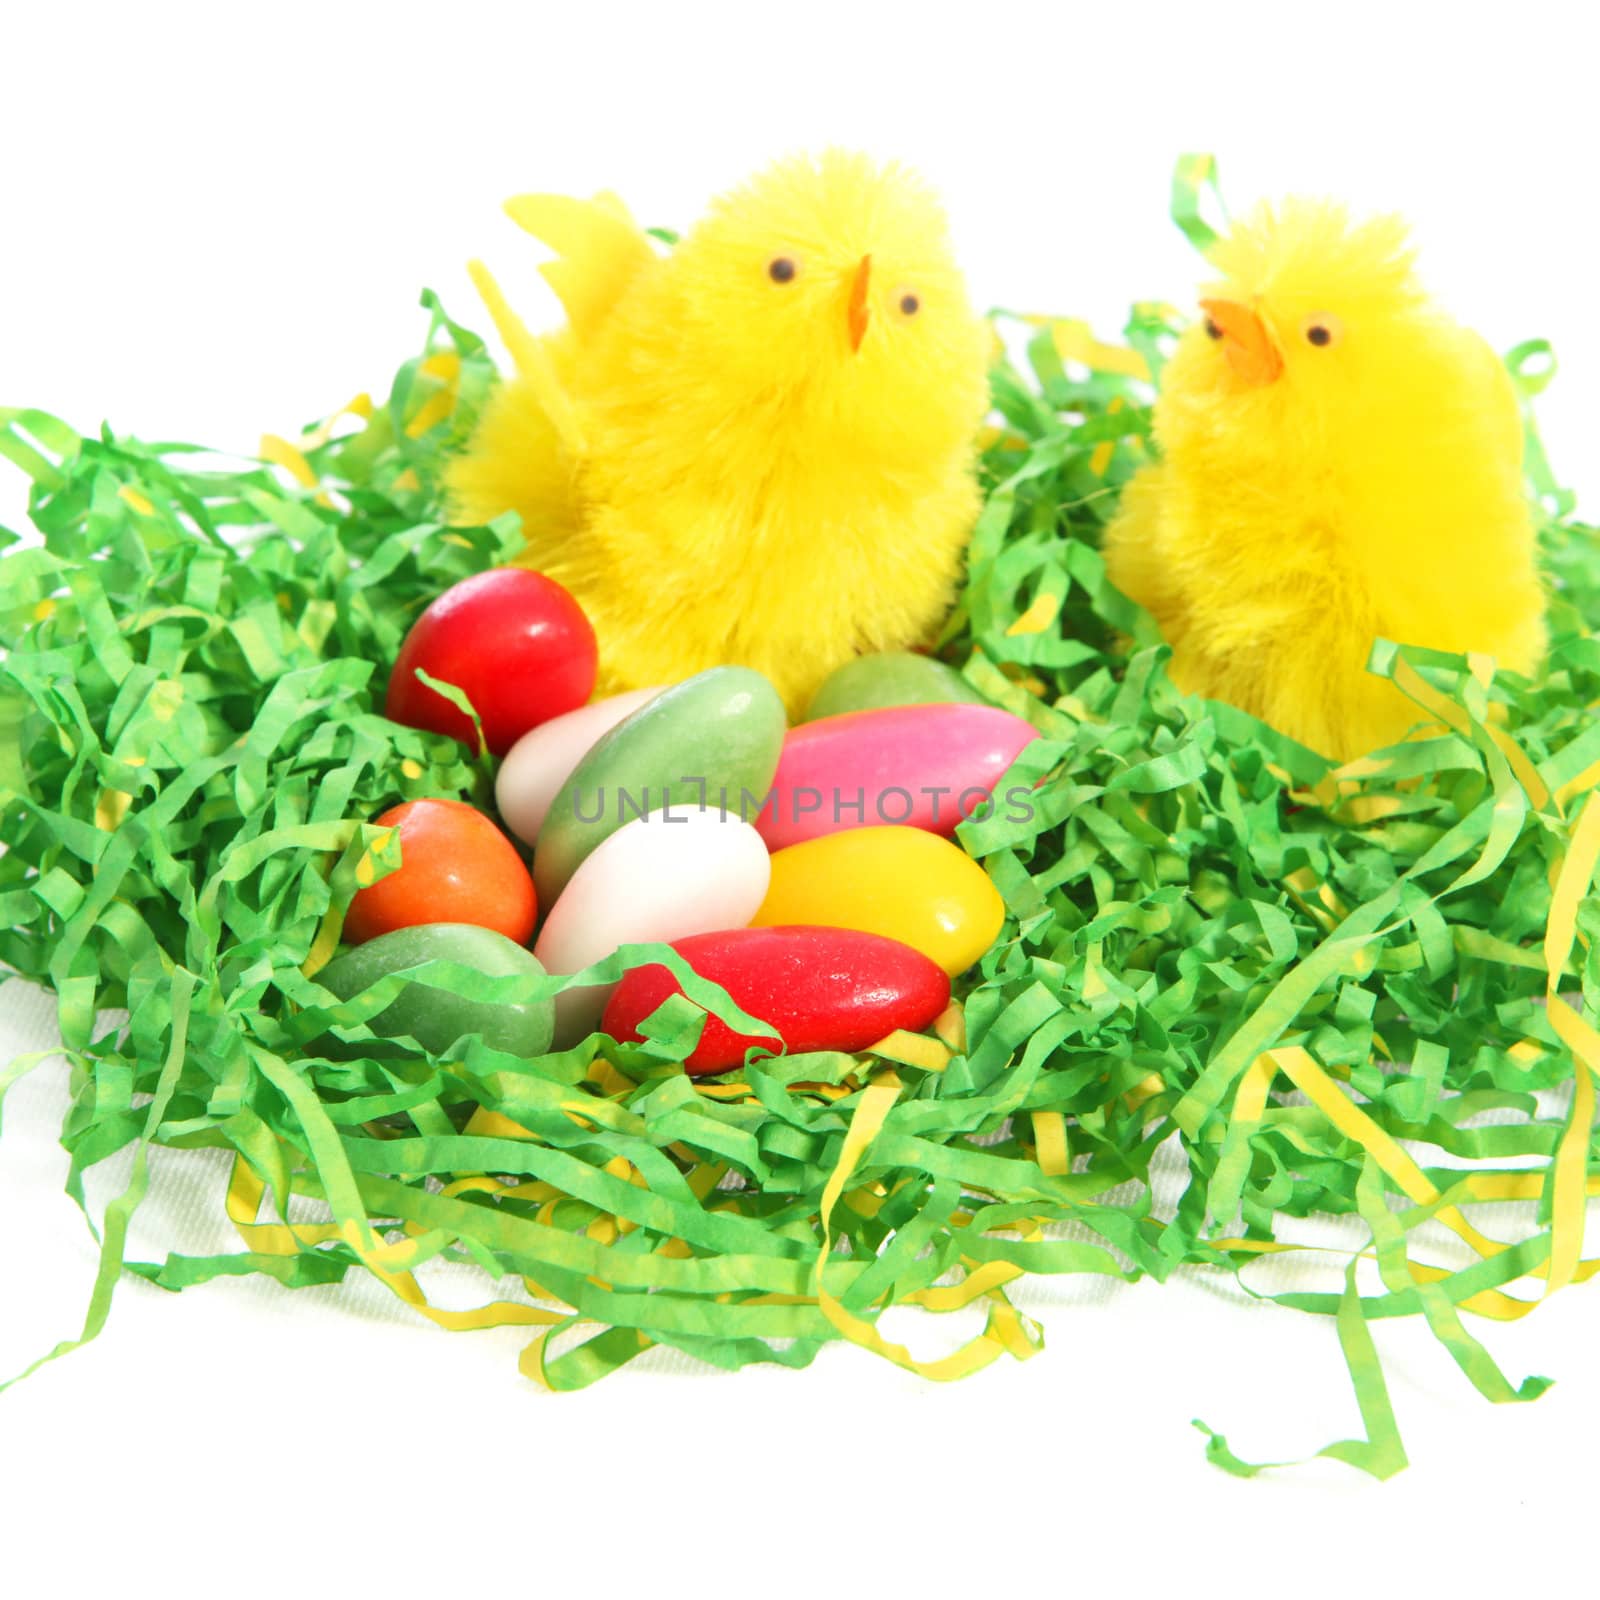 Easter chicks with a colourful clutch of eggs by Farina6000